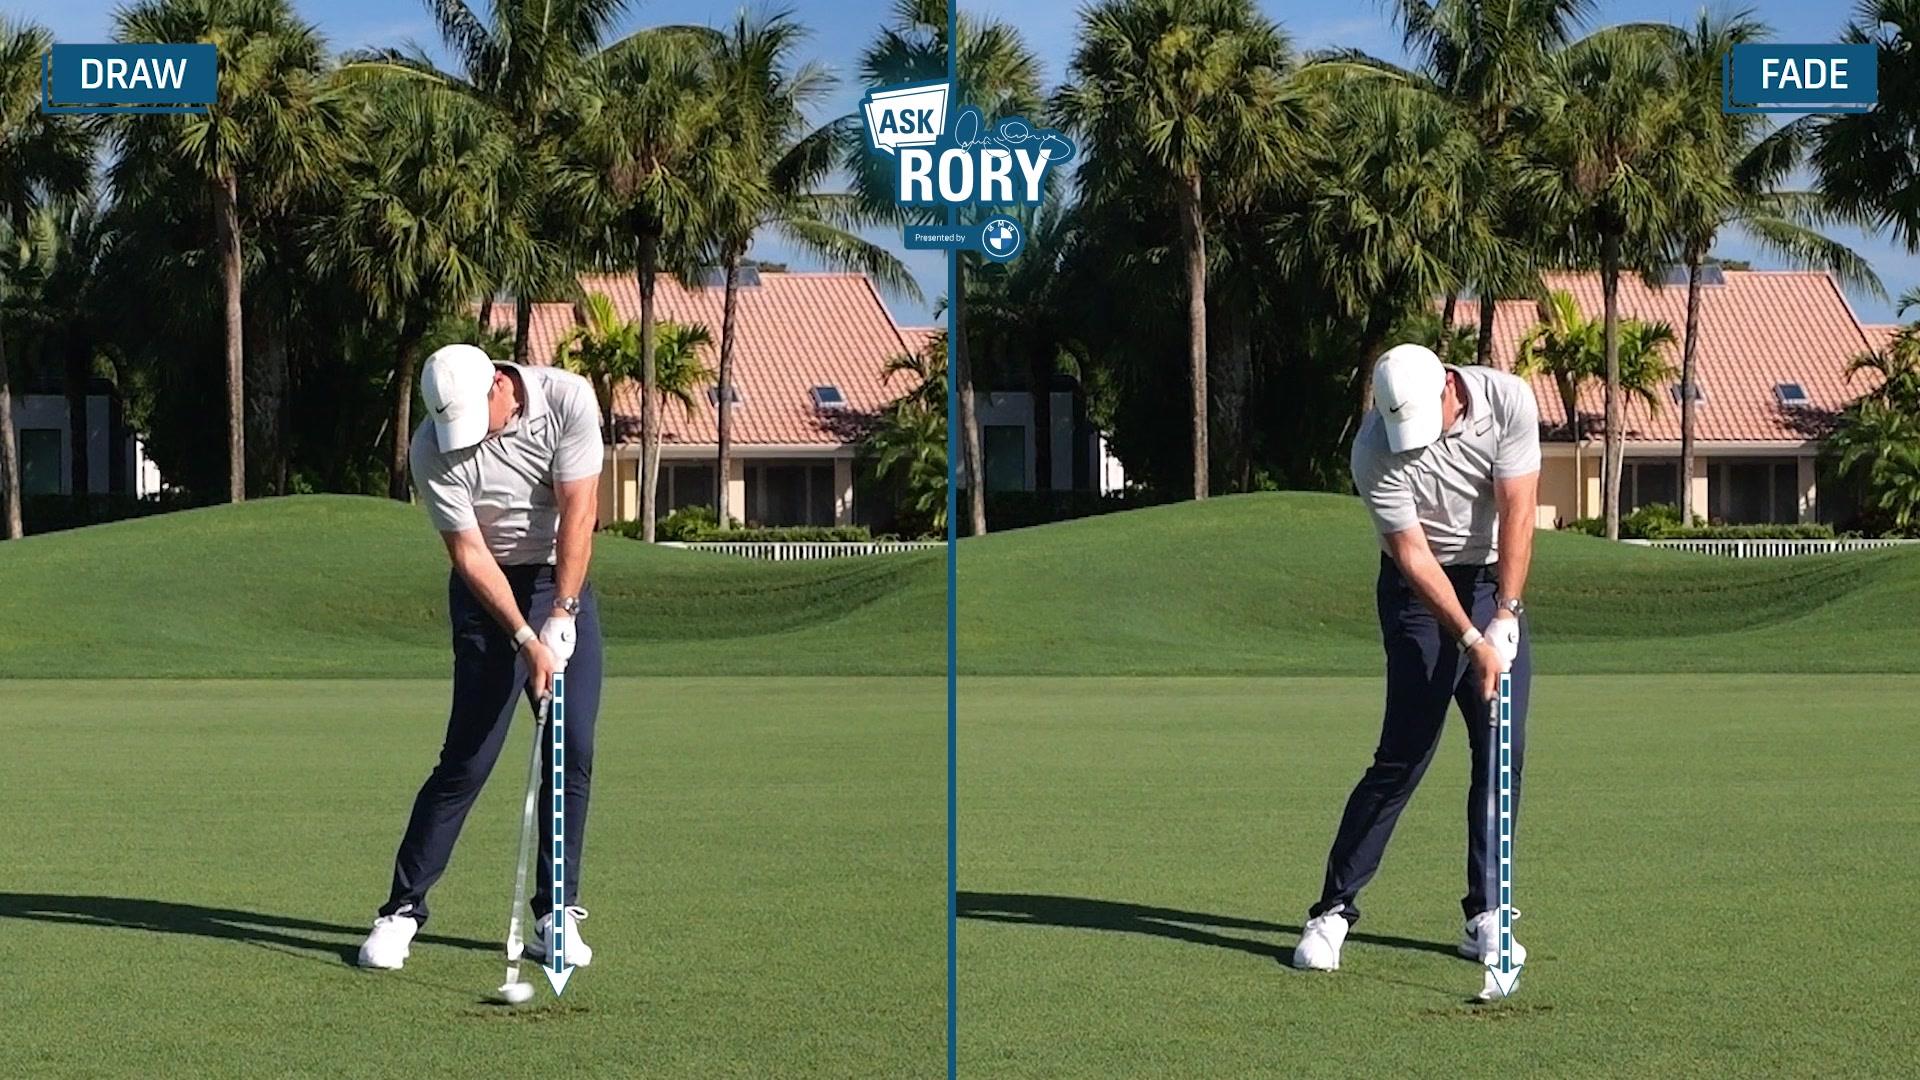 Ask Rory: Season 4: Impact Position for Shaping Shots